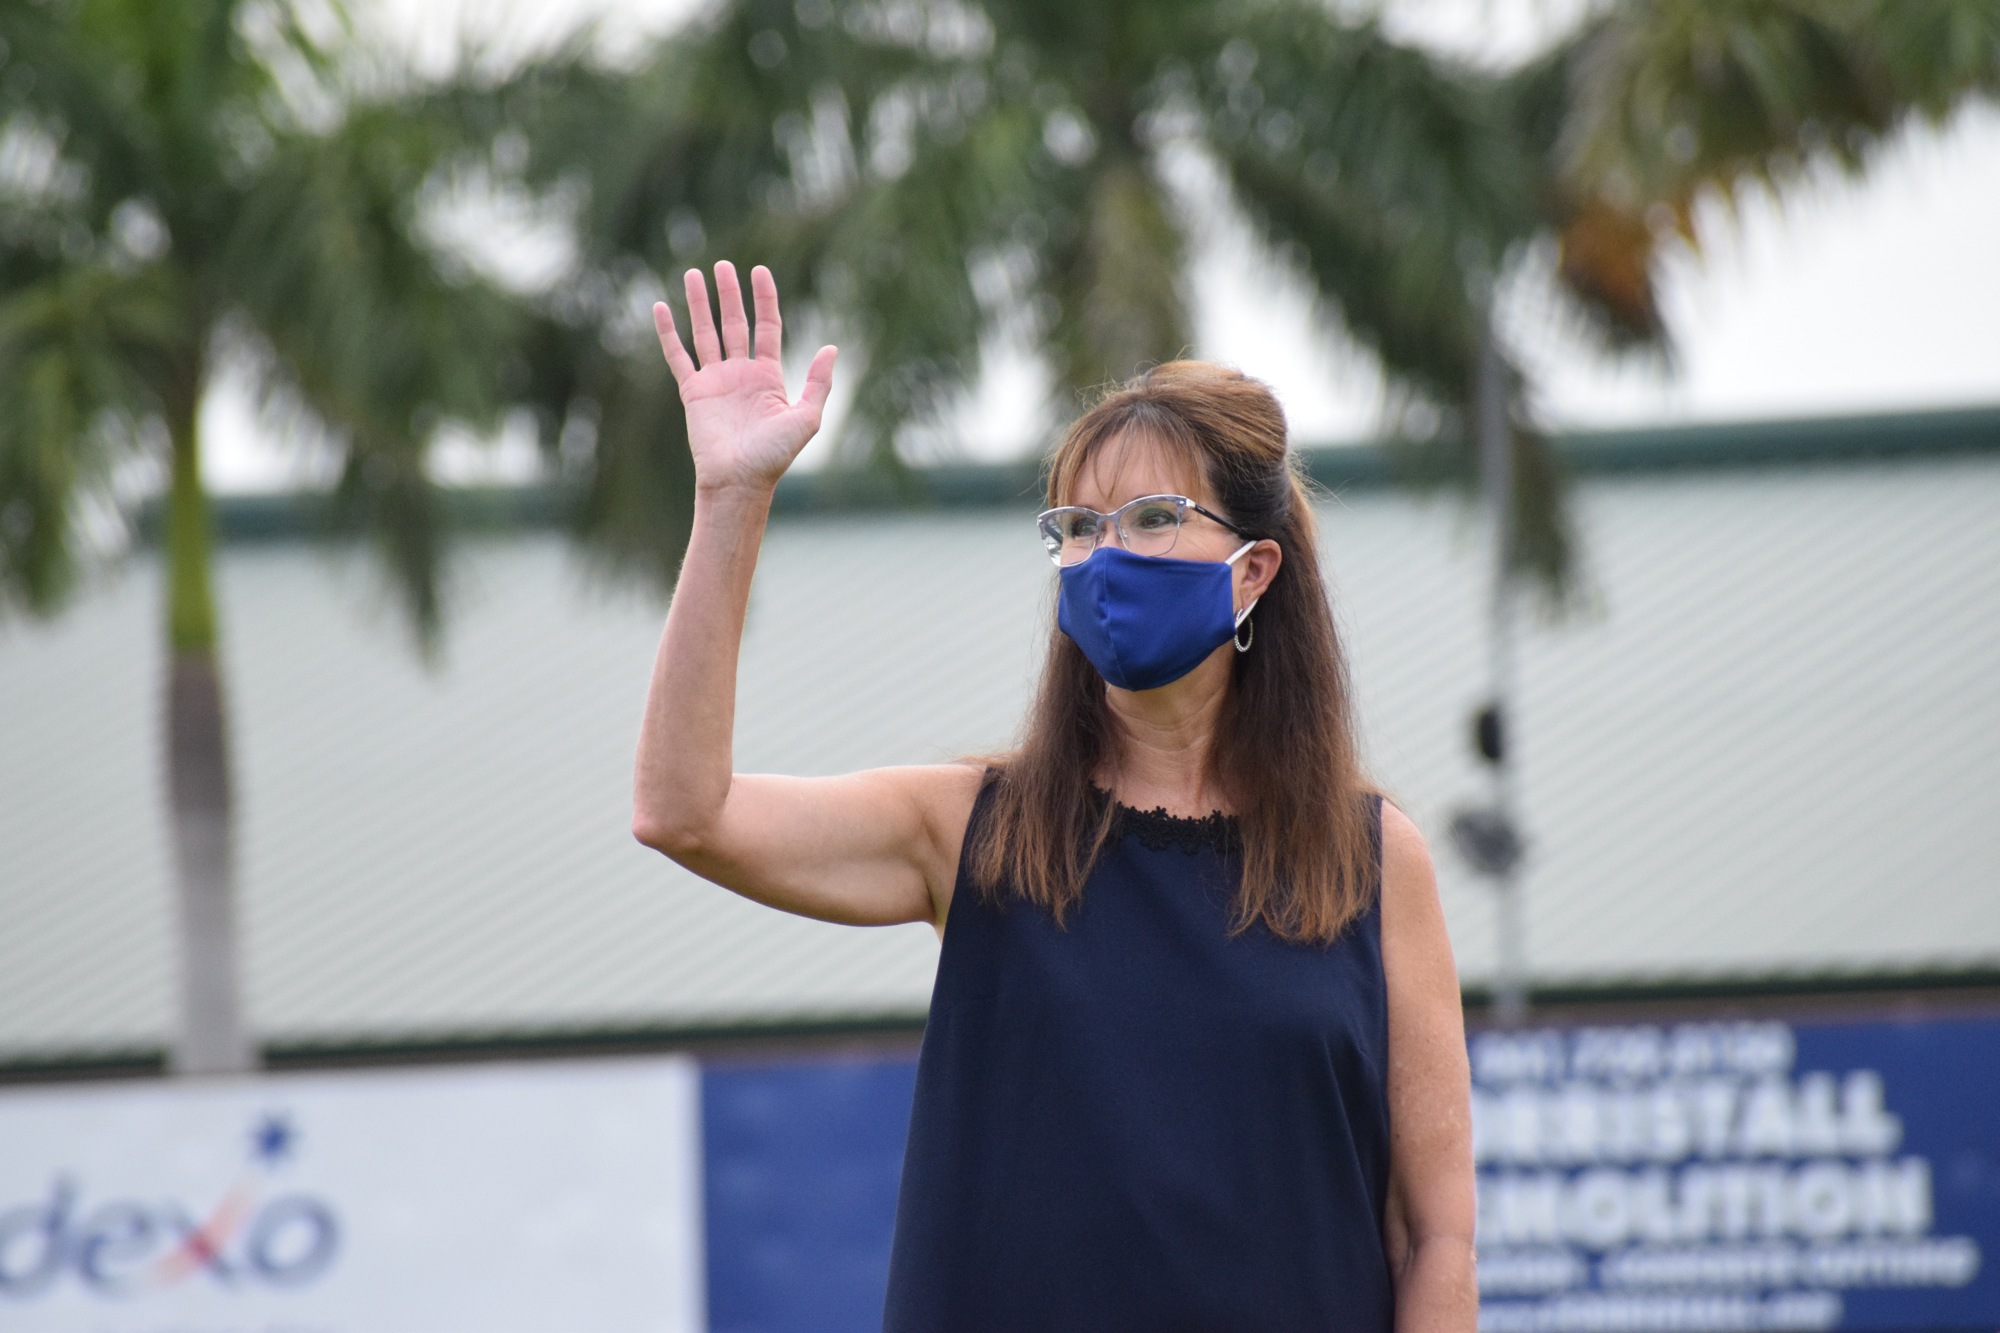 Cynthia Saunders, superintendent of the School District of Manatee County, waves to families at Braden River High School's graduation ceremony. Saunders has lead the district through many adjustments during the pandemic File photo